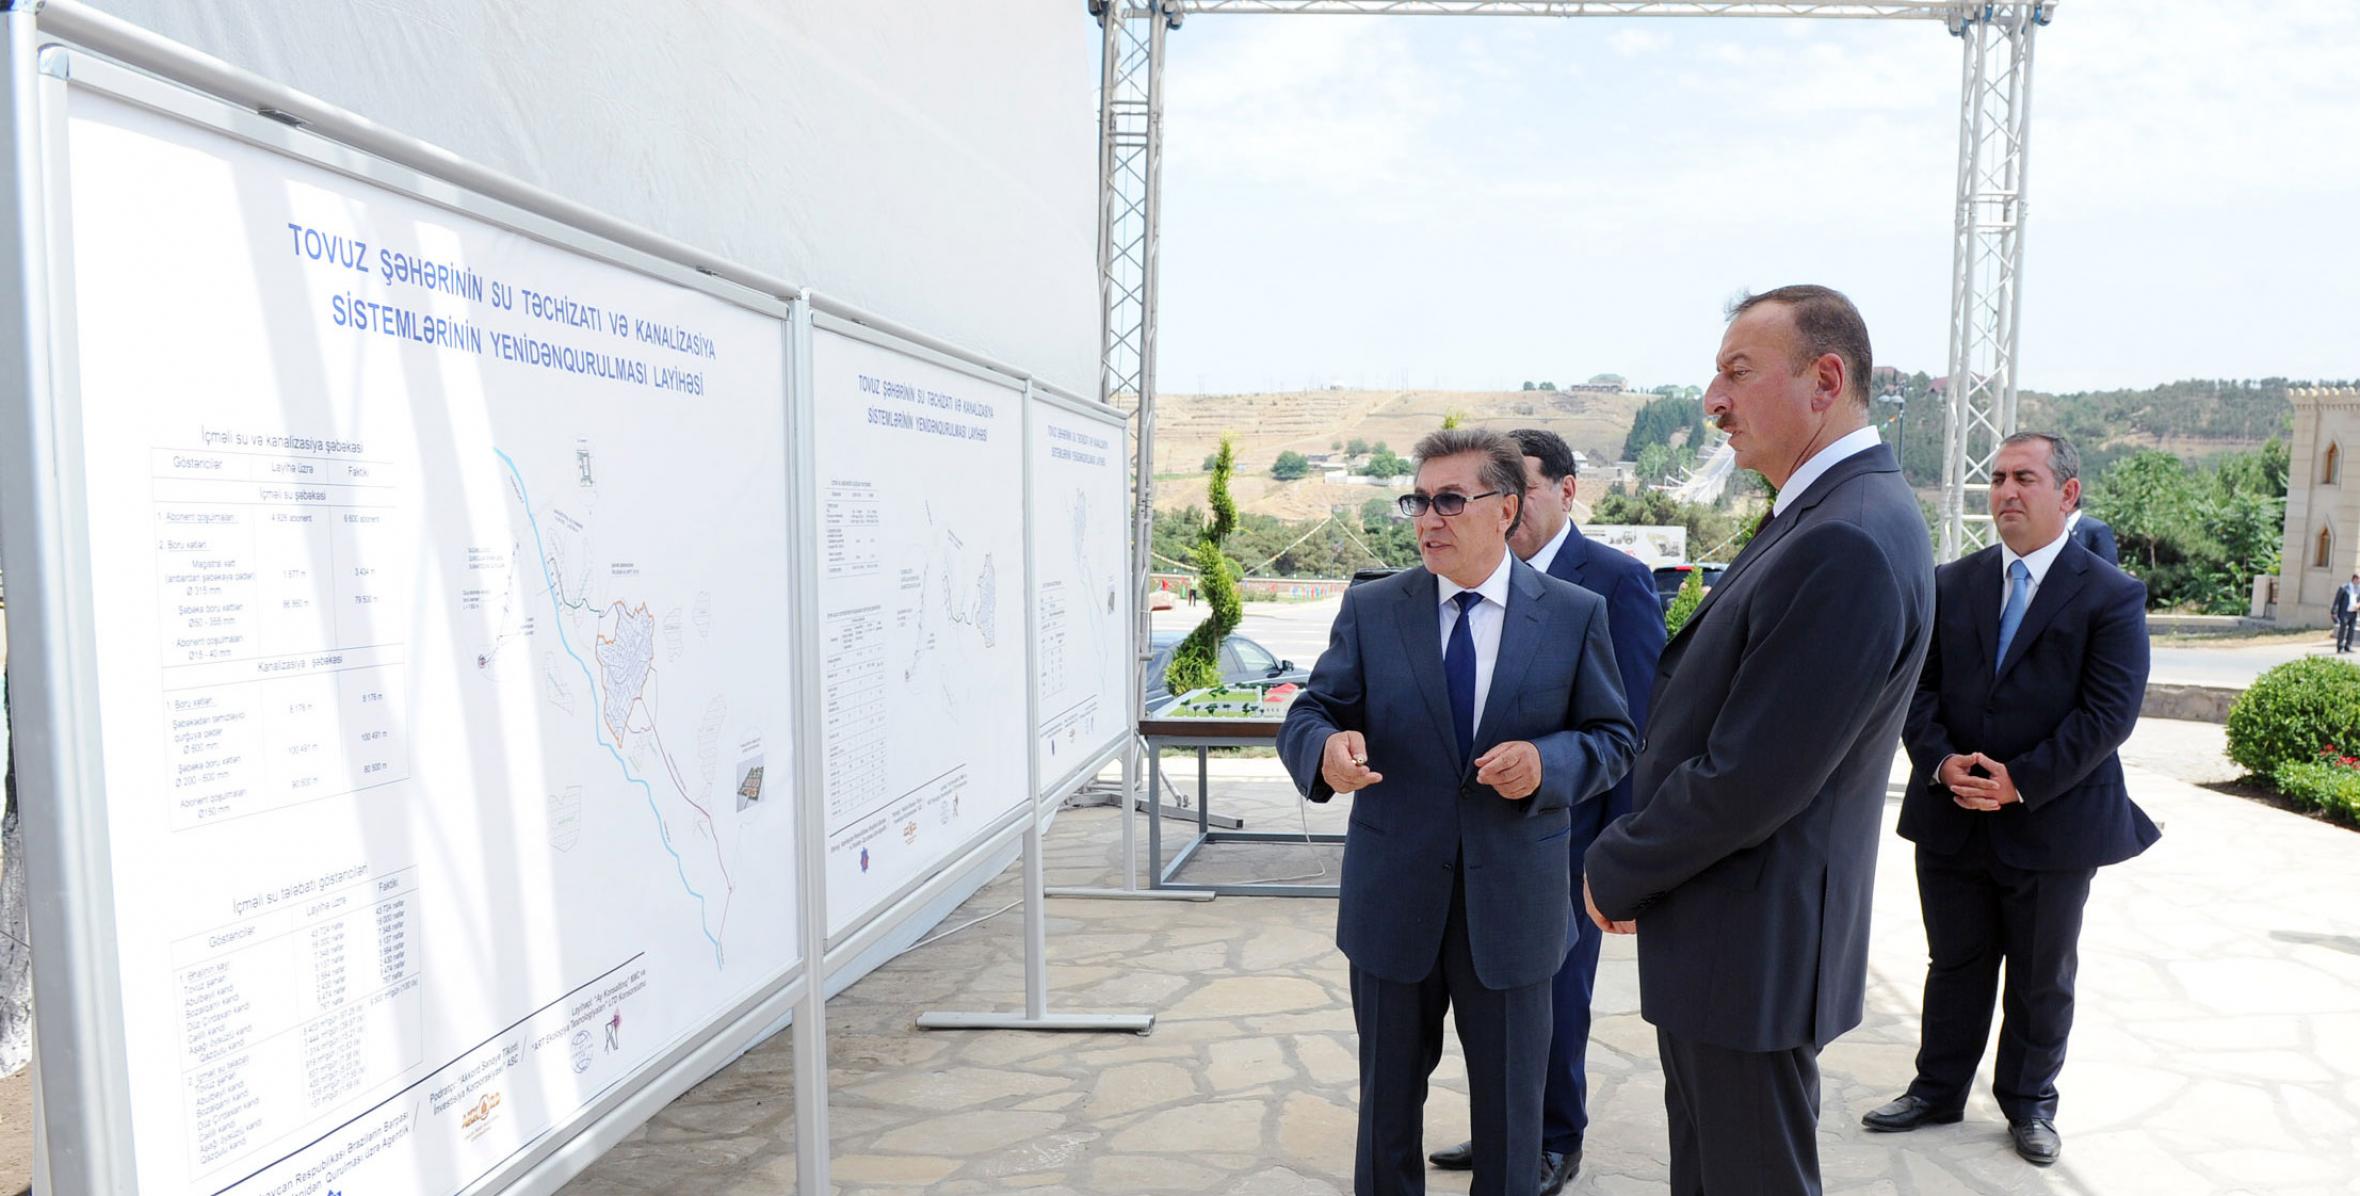 Ilham Aliyev attended a ceremony to commission water supply and sewage systems of Tovuz after reconstruction